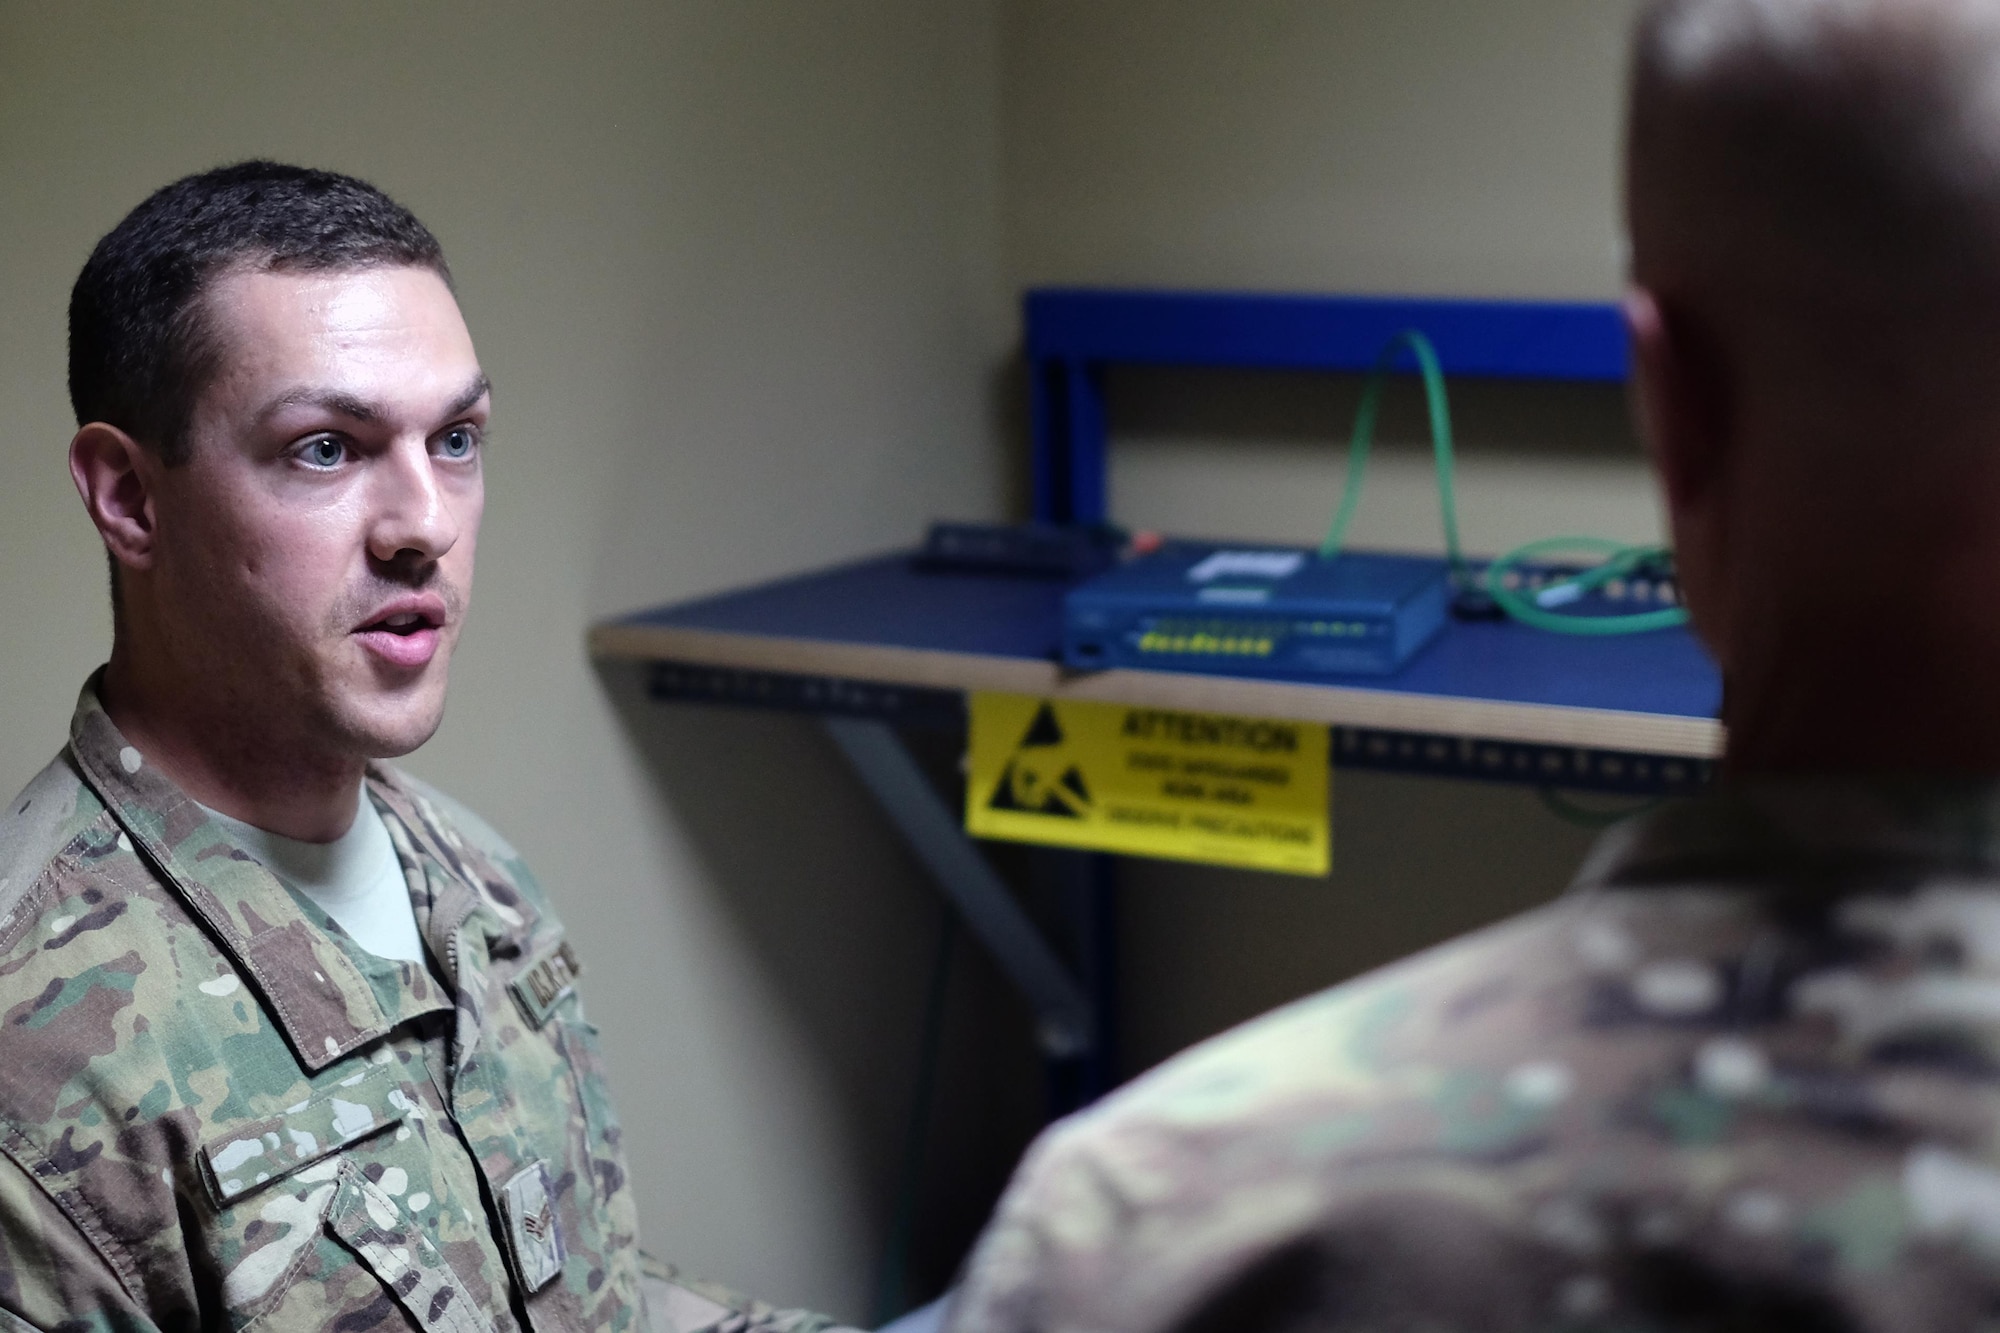 Staff Sgt. Tanner, 380th Expeditionary Communication Squadron Communications Fly-away Kit network manager explains how to establish a secure connection through a CFK June 27, 2017, at an undisclosed location in southwest Asia. In the event of a network outage, CFKs can be rapidly deployed to maintain operations. Recently CFKs gathered critical flight data during one such outage to ensure the mission for local aircraft. (U.S. Air Force photo by Senior Airman Preston Webb)